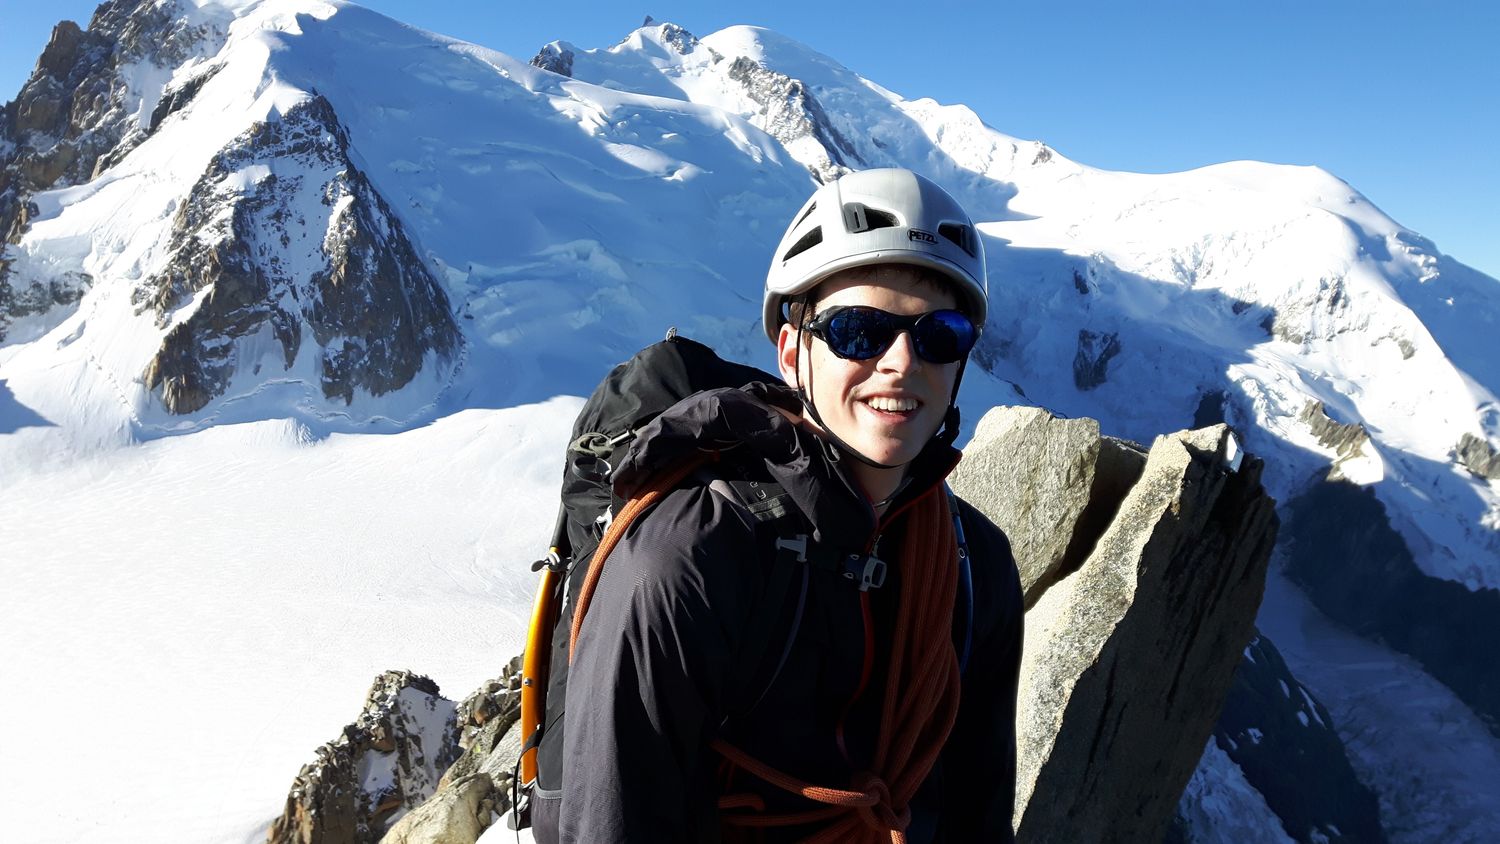  On the Cosmiques Arete 